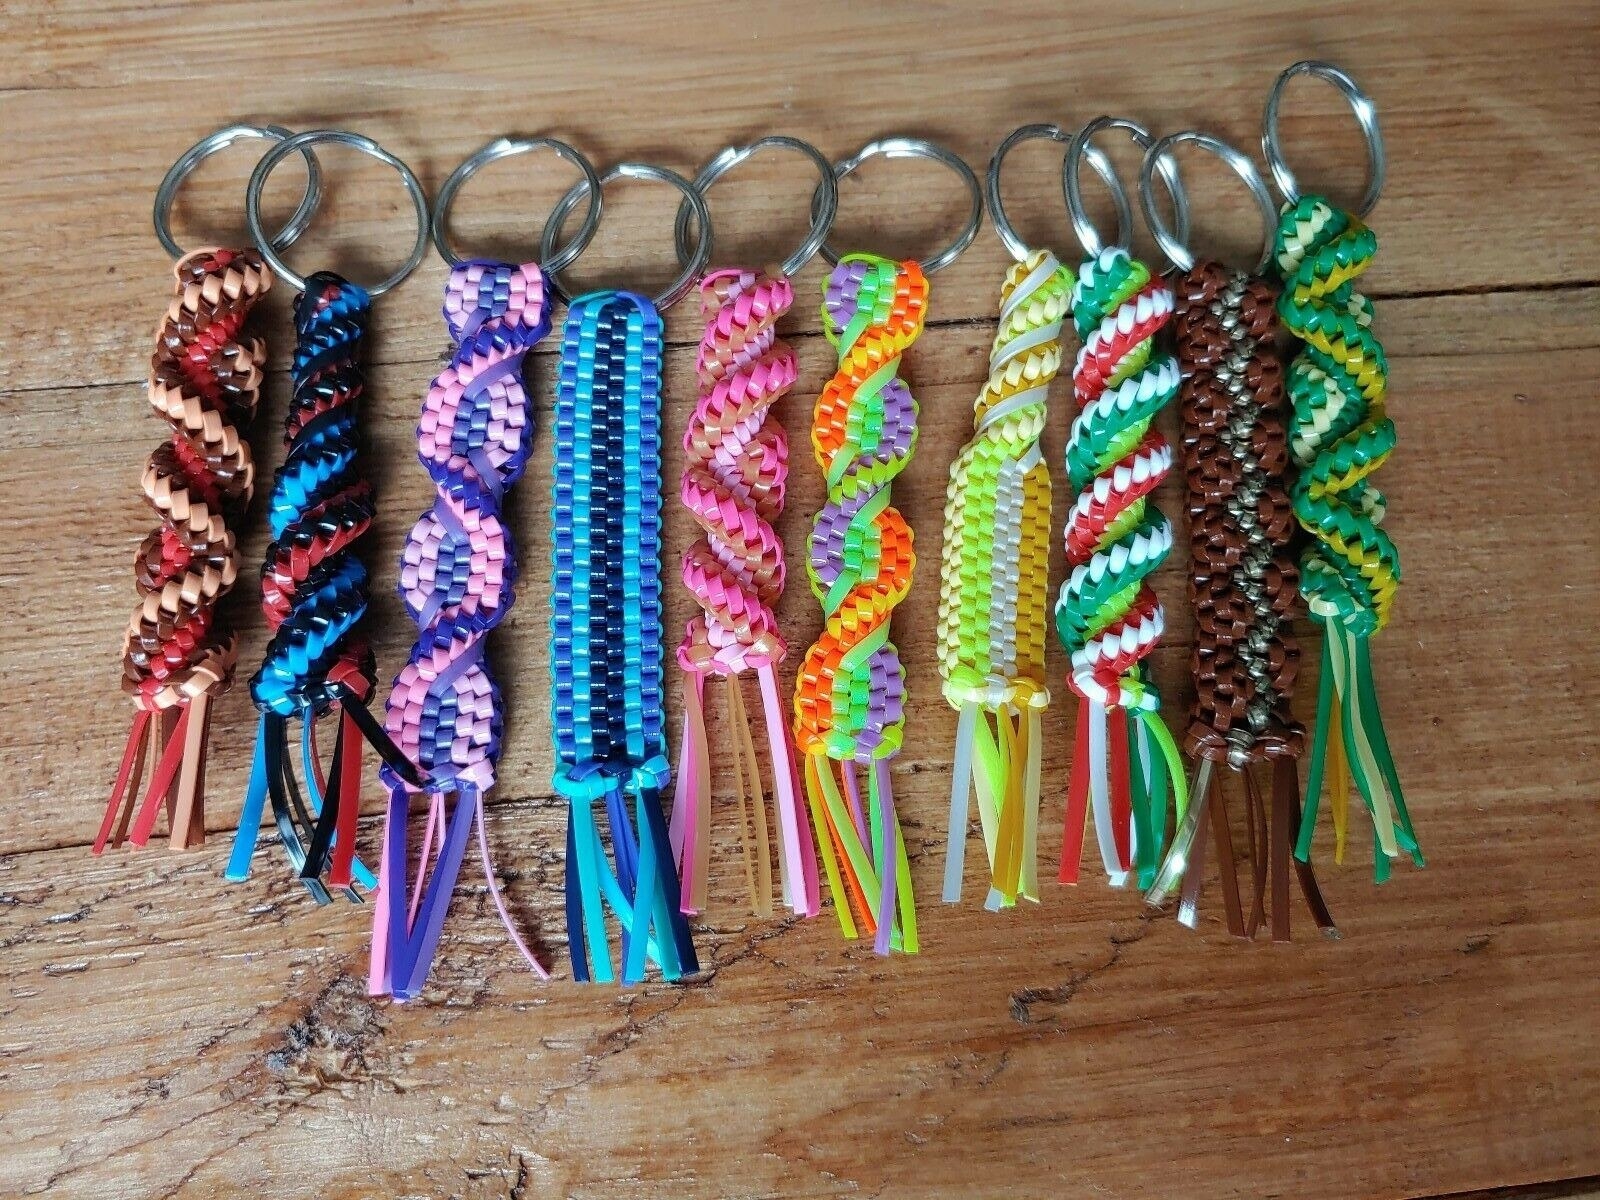 A close up image of several brightly coloured plastic keychains in which the threads have been woven into a pattern like a scoobie lying on a wooden table